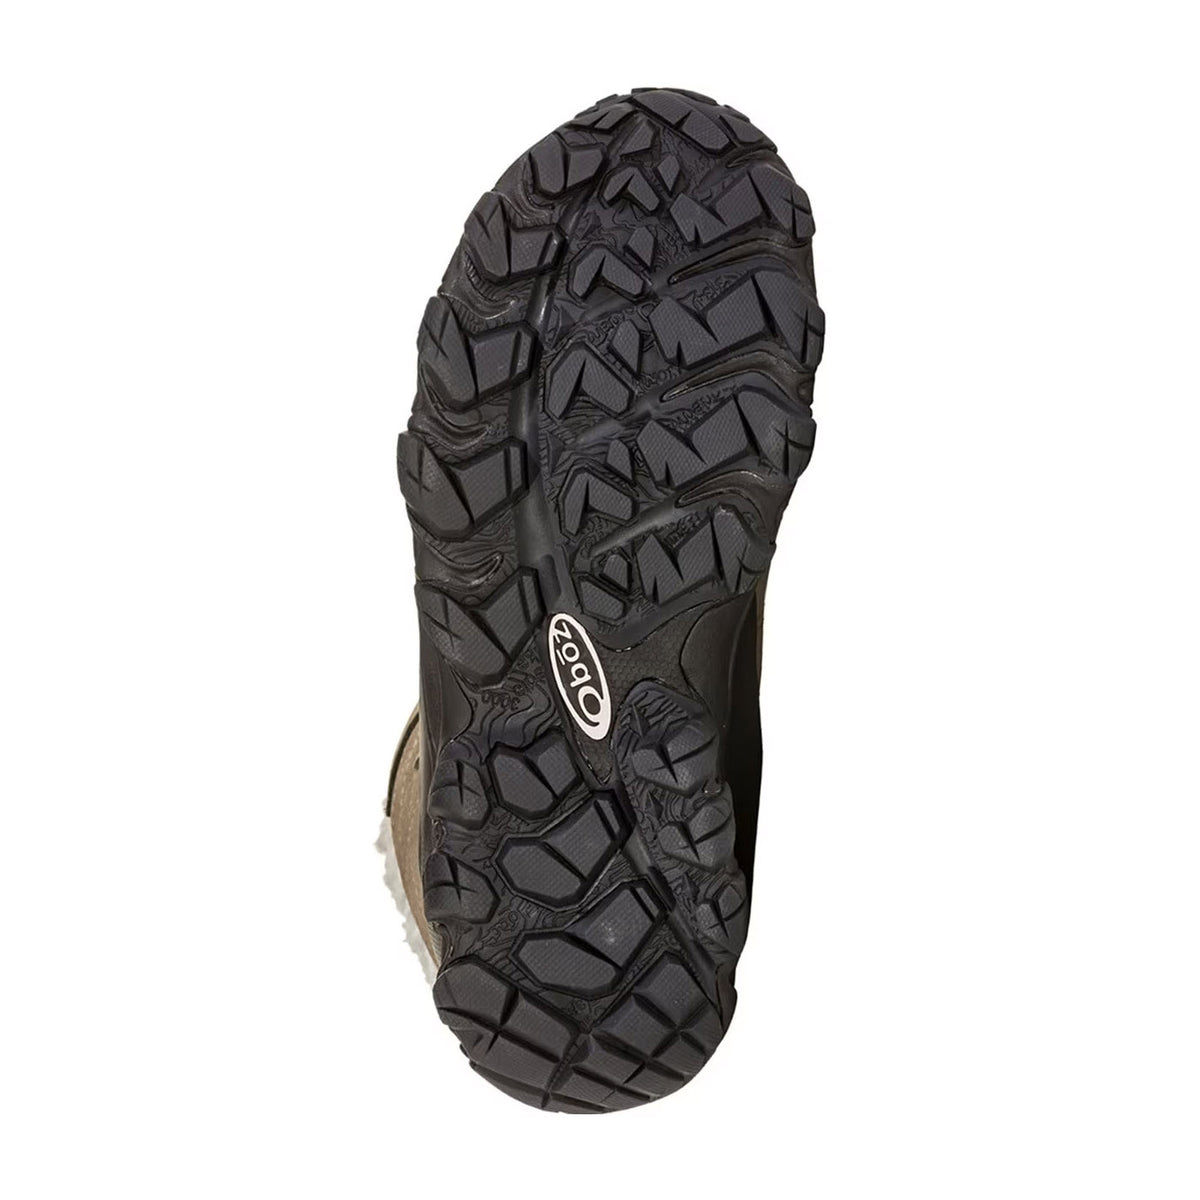 Bottom view of a black waterproof hiking boot showing its detailed tread pattern with the brand logo &quot;Oboz&quot; visible on the sole.